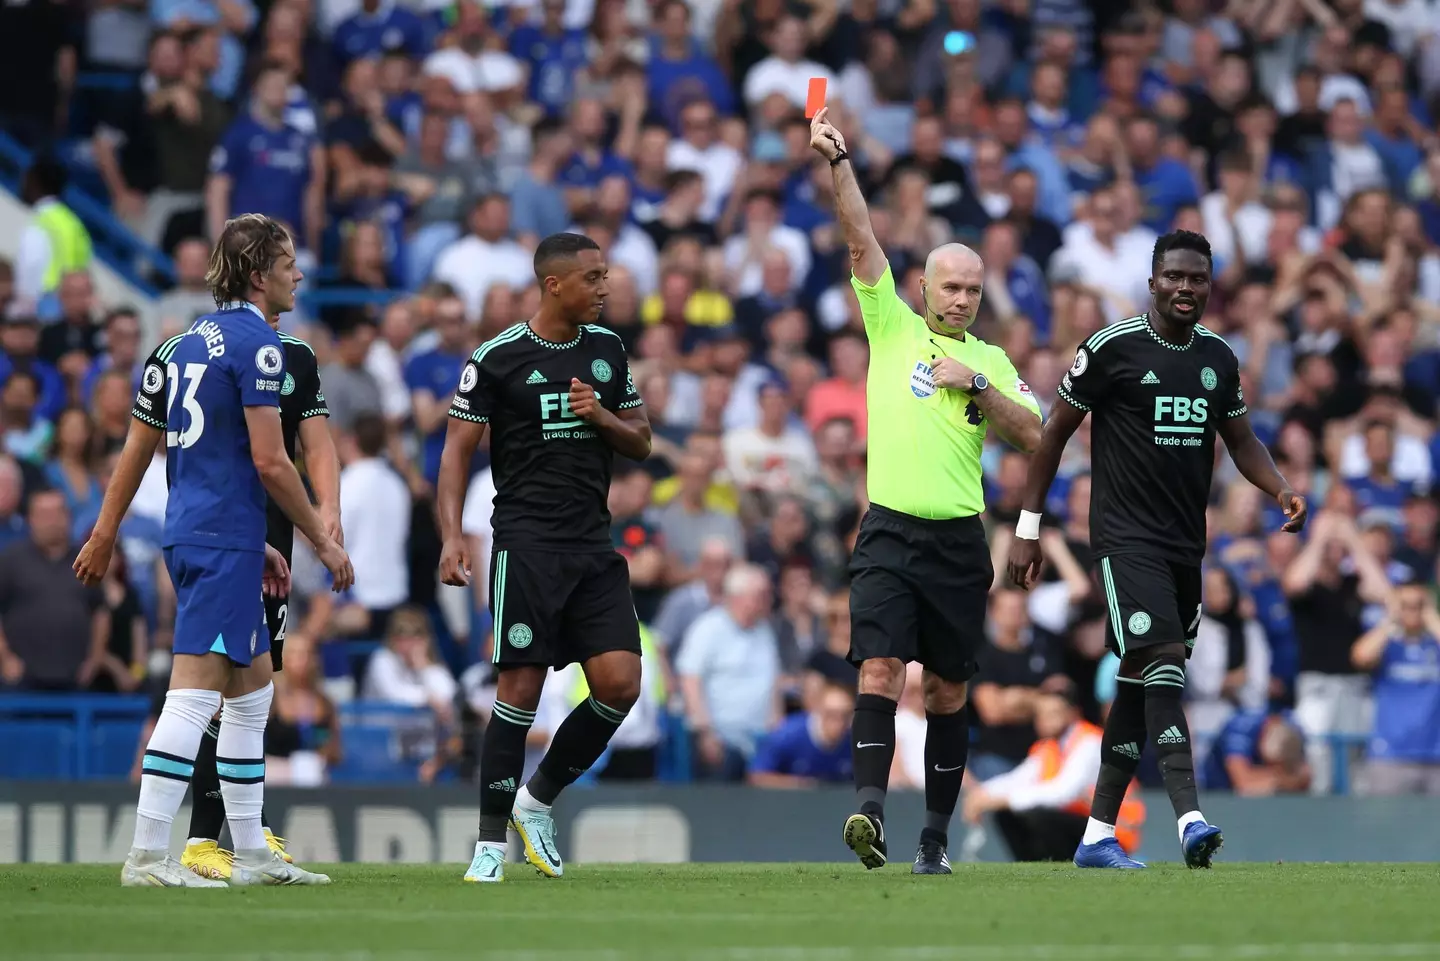 Conor Gallagher receiving a red card against Leicester City in the Premier League. (Alamy)